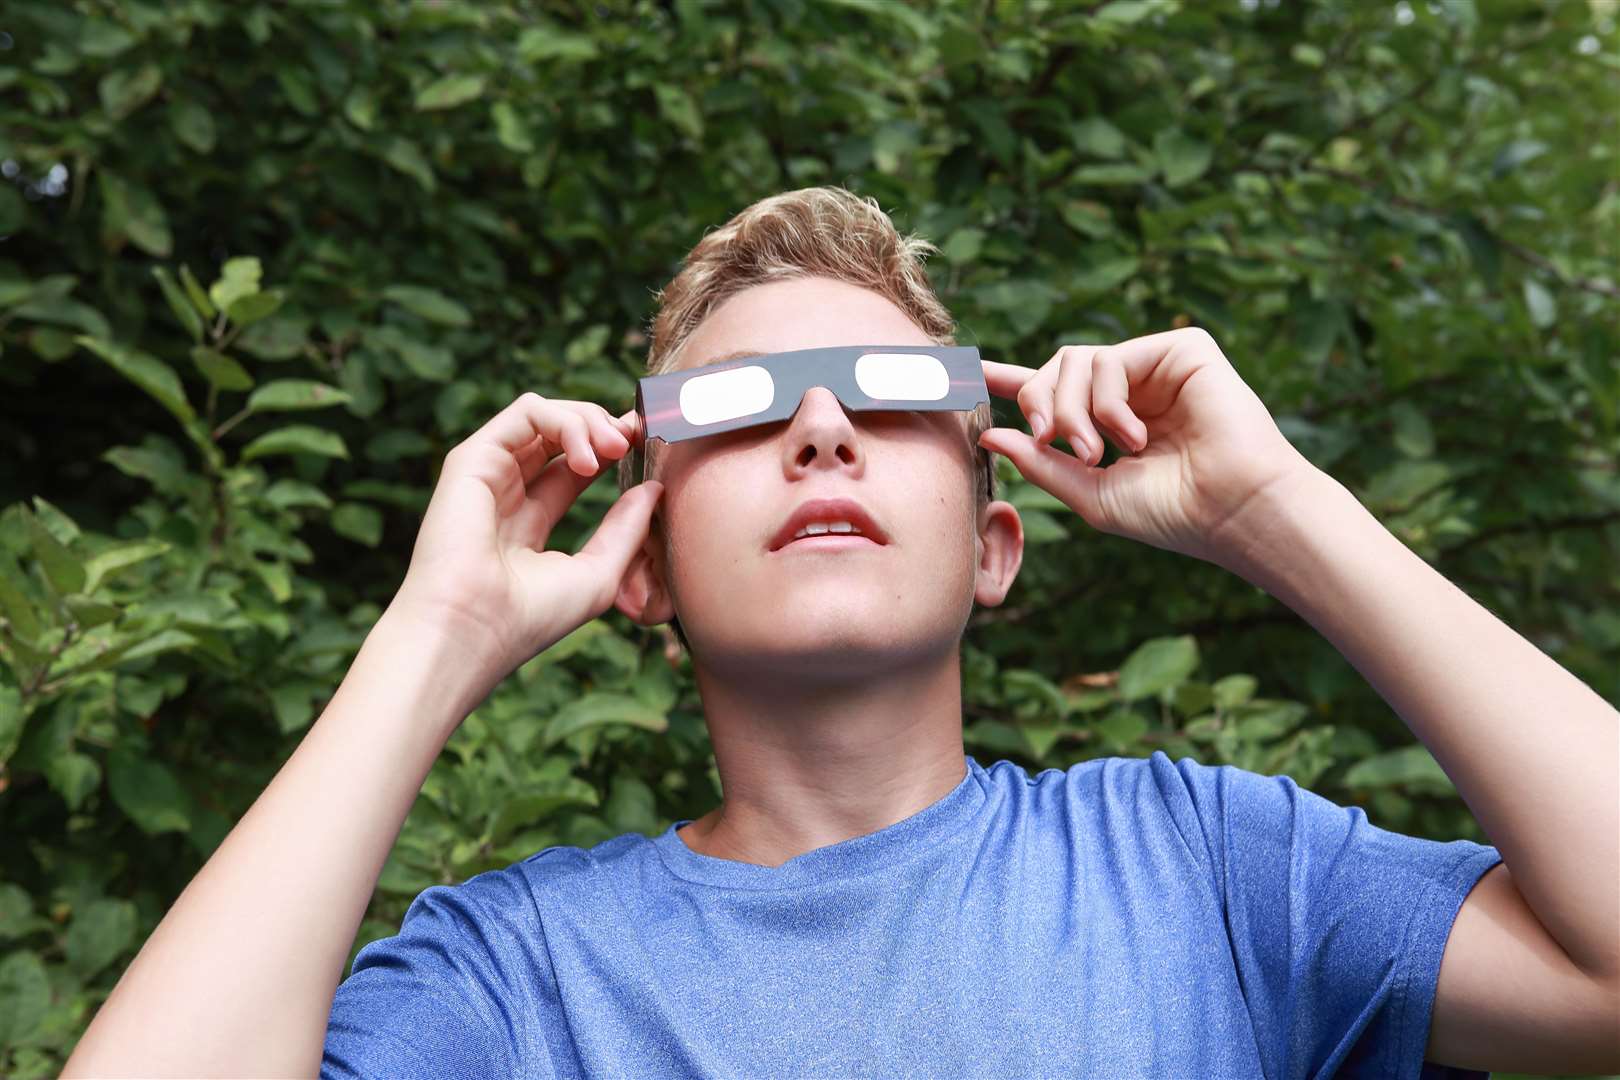 Many acquired special 'eclipse glasses' to be able to view the spectacle